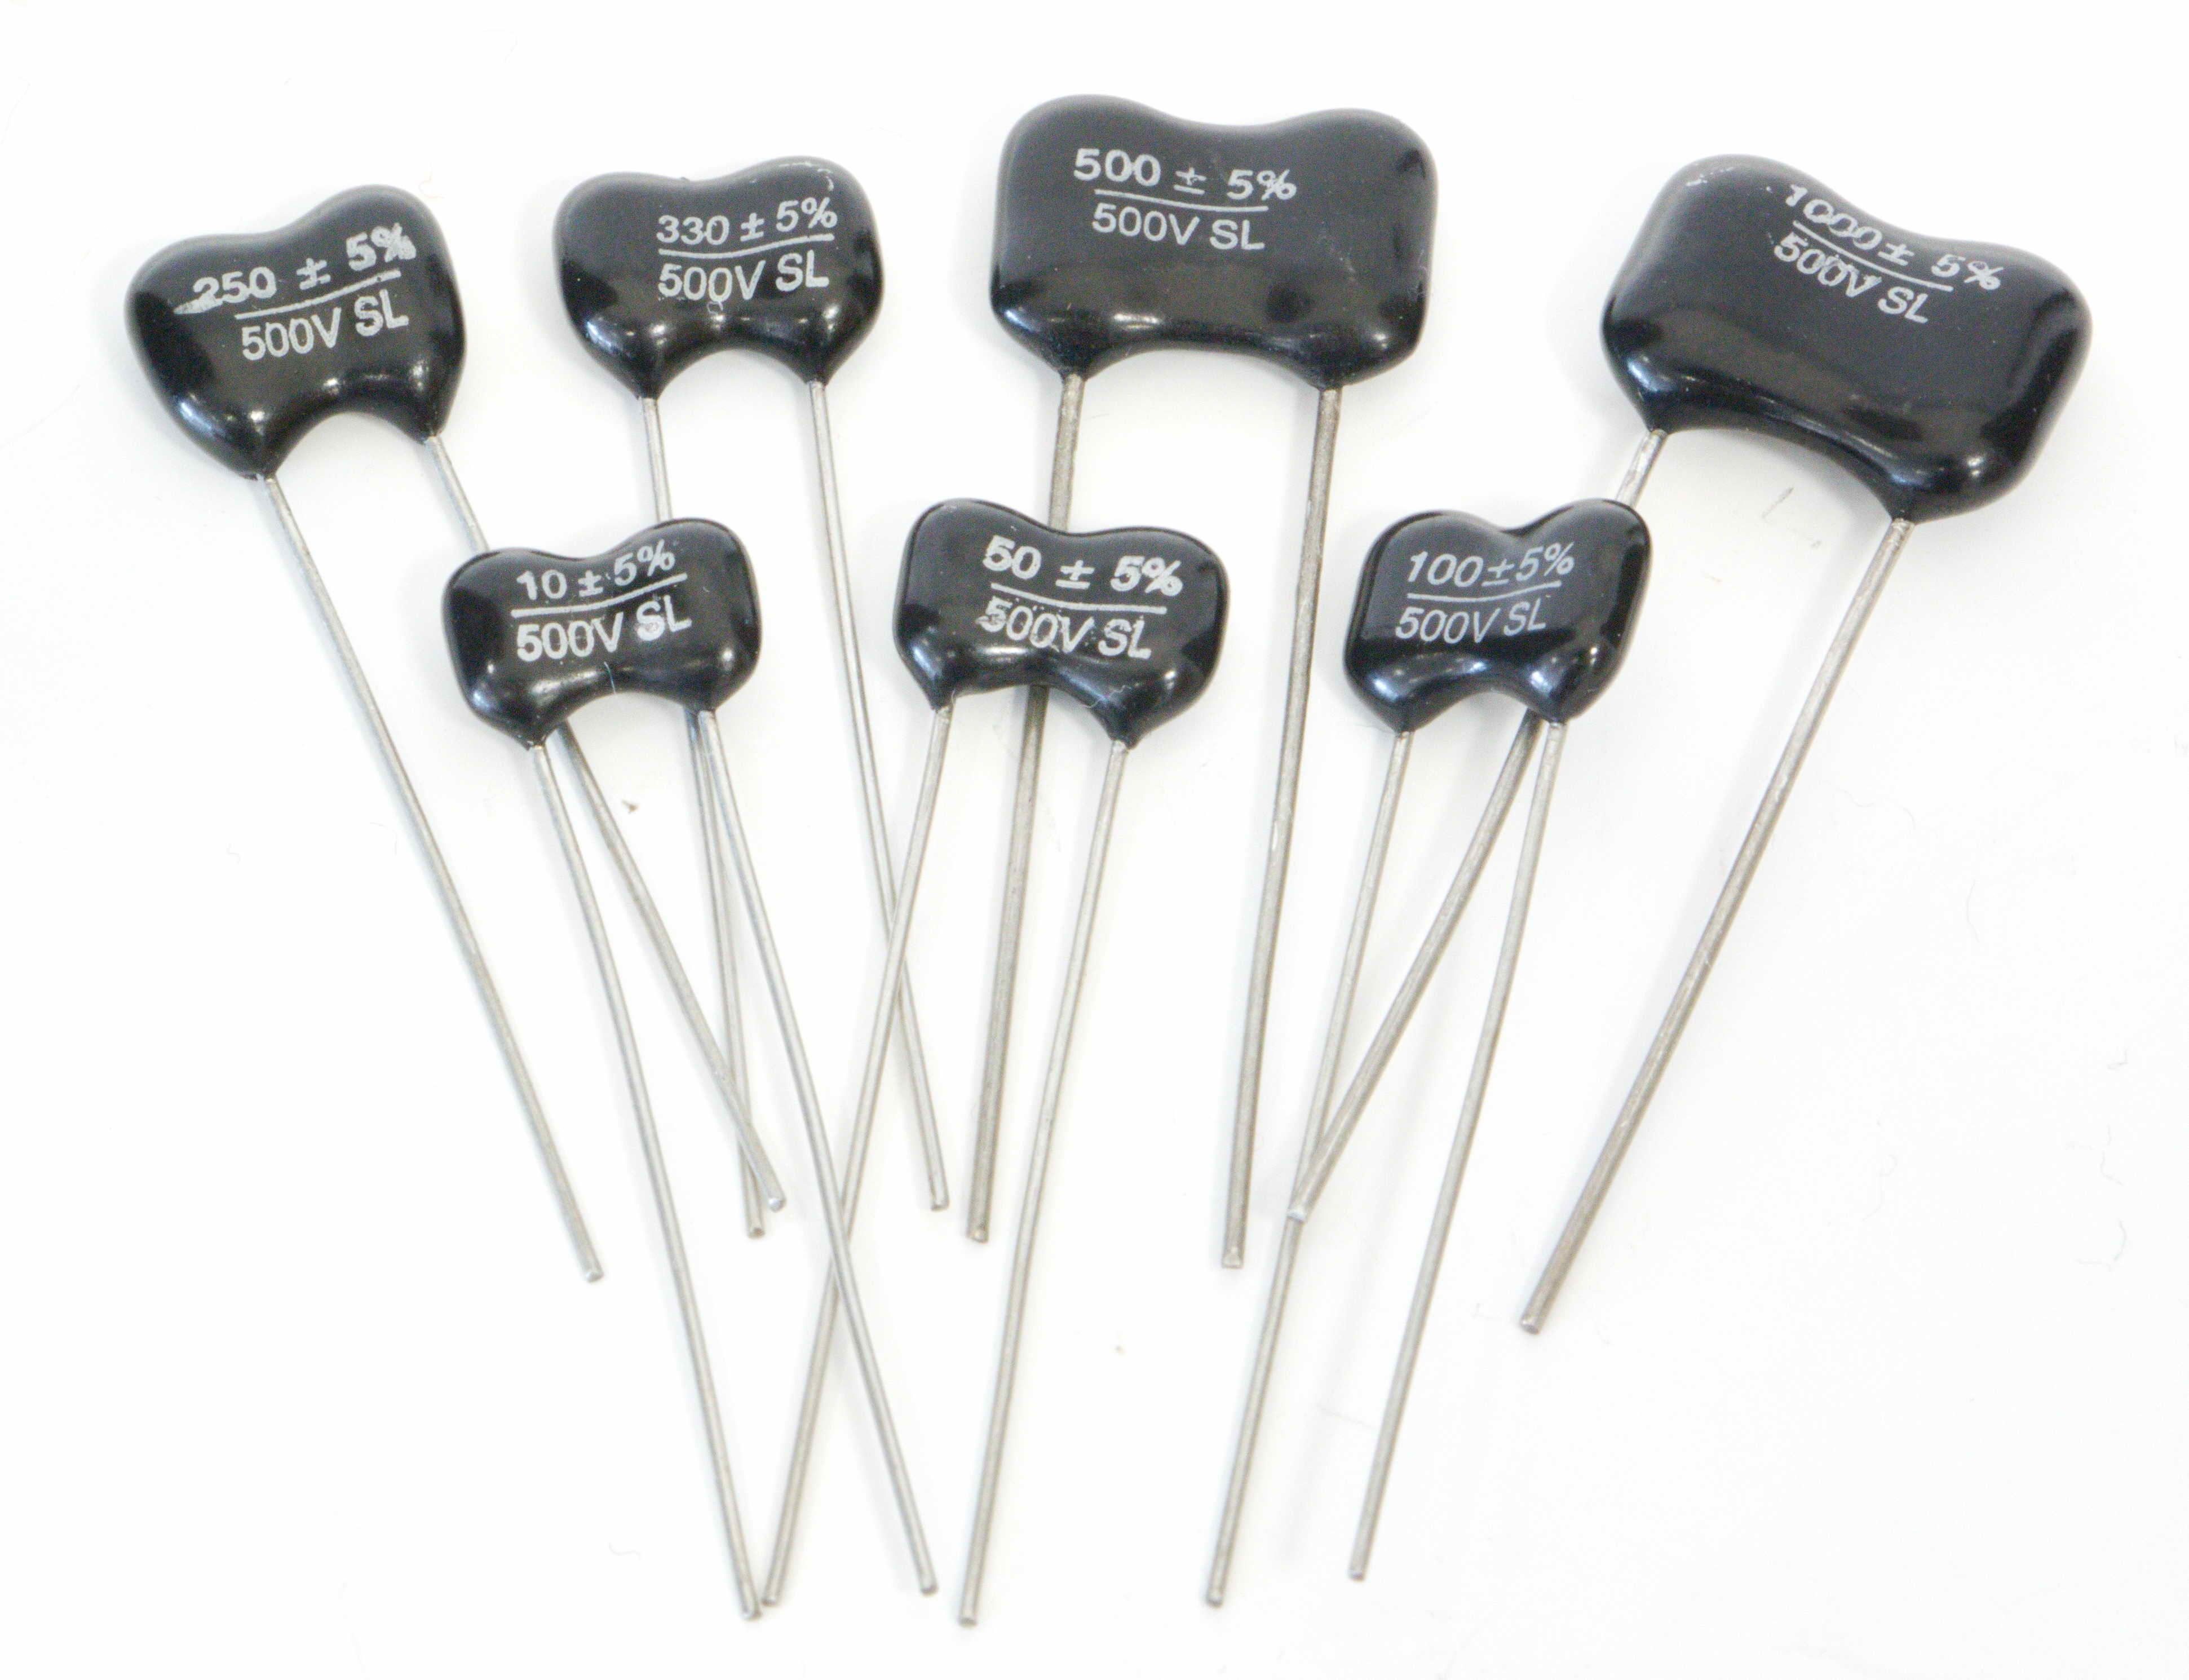 UK NEW 10pcs Silver MICA Capacitor 120pF 500V for guitar amps tone tube audio